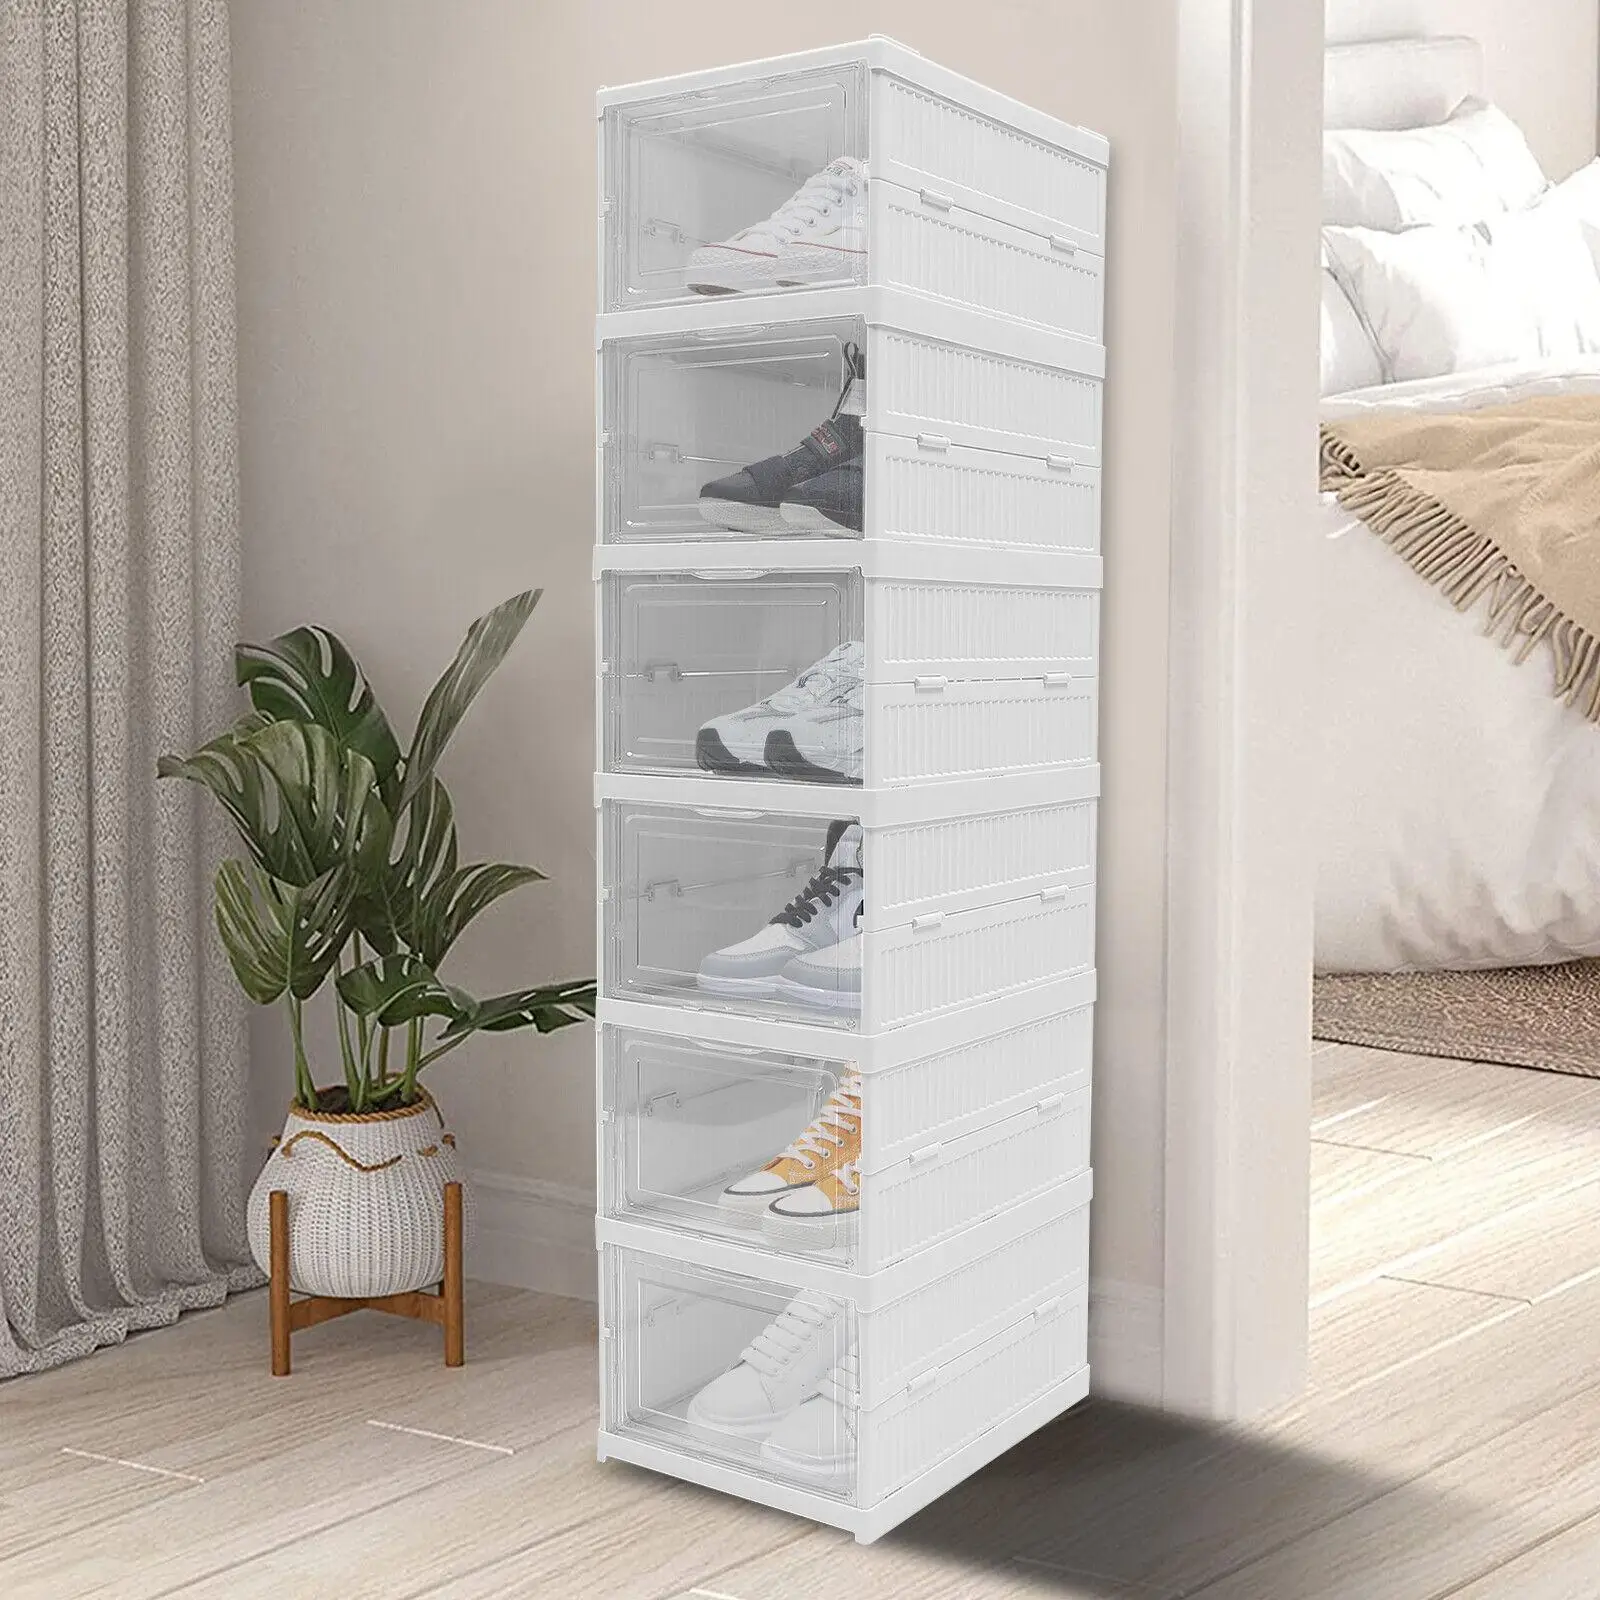 

6 Layer Installation-Free Shoe Box With Transparent Doors Stackable Shoe Cabinet Foldable Entryway Shoe Rack Storage Organizer